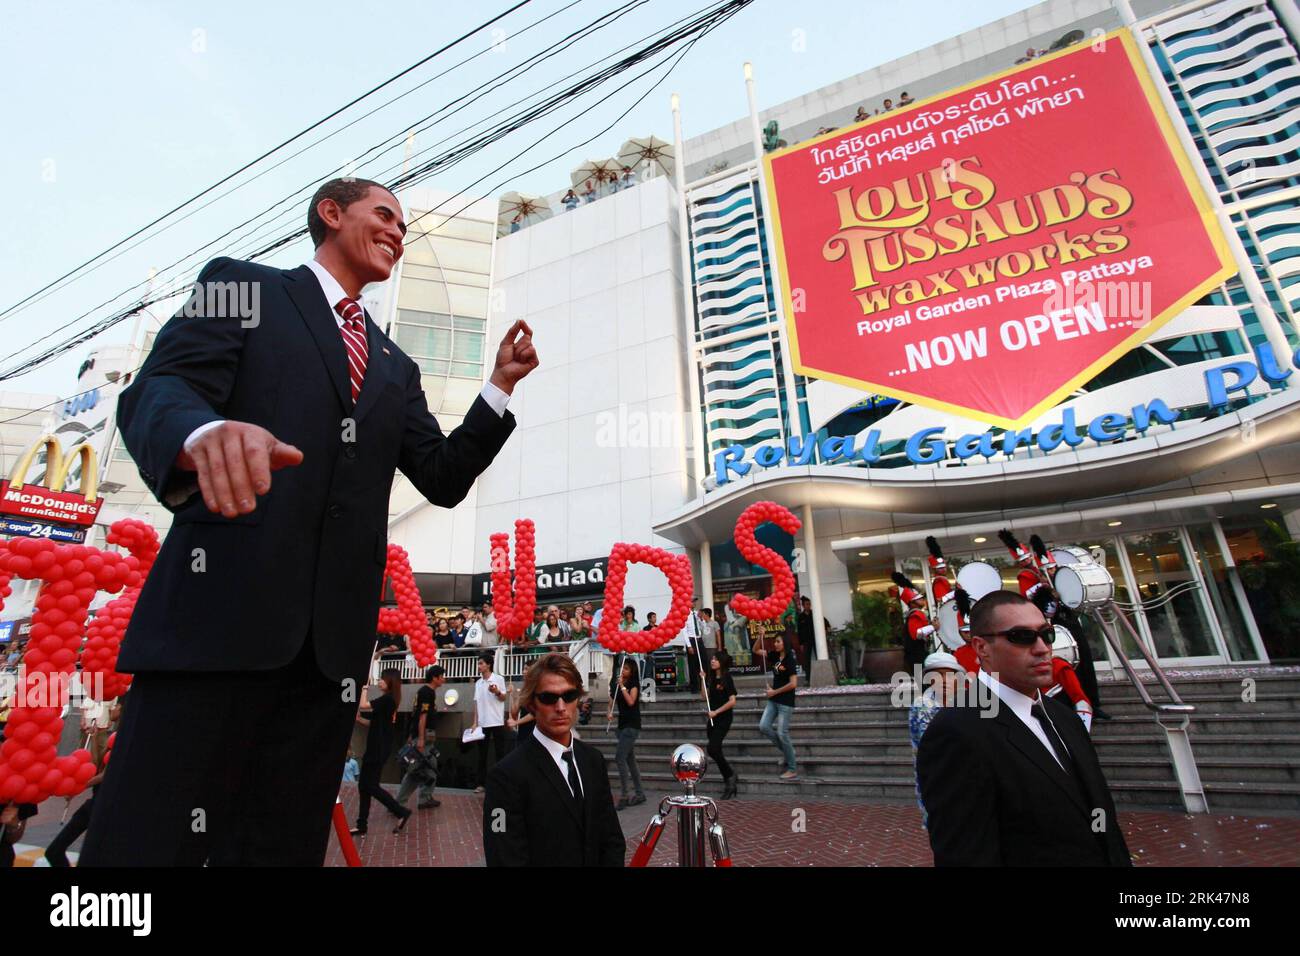 Bildnummer: 53598368  Datum: 13.11.2009  Copyright: imago/Xinhua (091114) -- PATTAYA, Nov. 14, 2009 (Xinhua) -- Lifesize wax figure of U.S. President Barack Obama can be seen outside the Louis Tussaud s Waxworks royal garden Plaza in Pattaya of Thailand, on Nov. 13, 2009. Some 68 figures of personages will displayed in the first waxworks museum in Pattaya which was formally inaugurated on Friday. (Xinhua/Zhu Li) (jl) (2)THAILAND-TOURISM-WAX WORKS PALACE PUBLICATIONxNOTxINxCHN kbdig xmk 2009 quer o0 Wachsfigur, Wachsfigurenmuseum    Bildnummer 53598368 Date 13 11 2009 Copyright Imago XINHUA  Pa Stock Photo